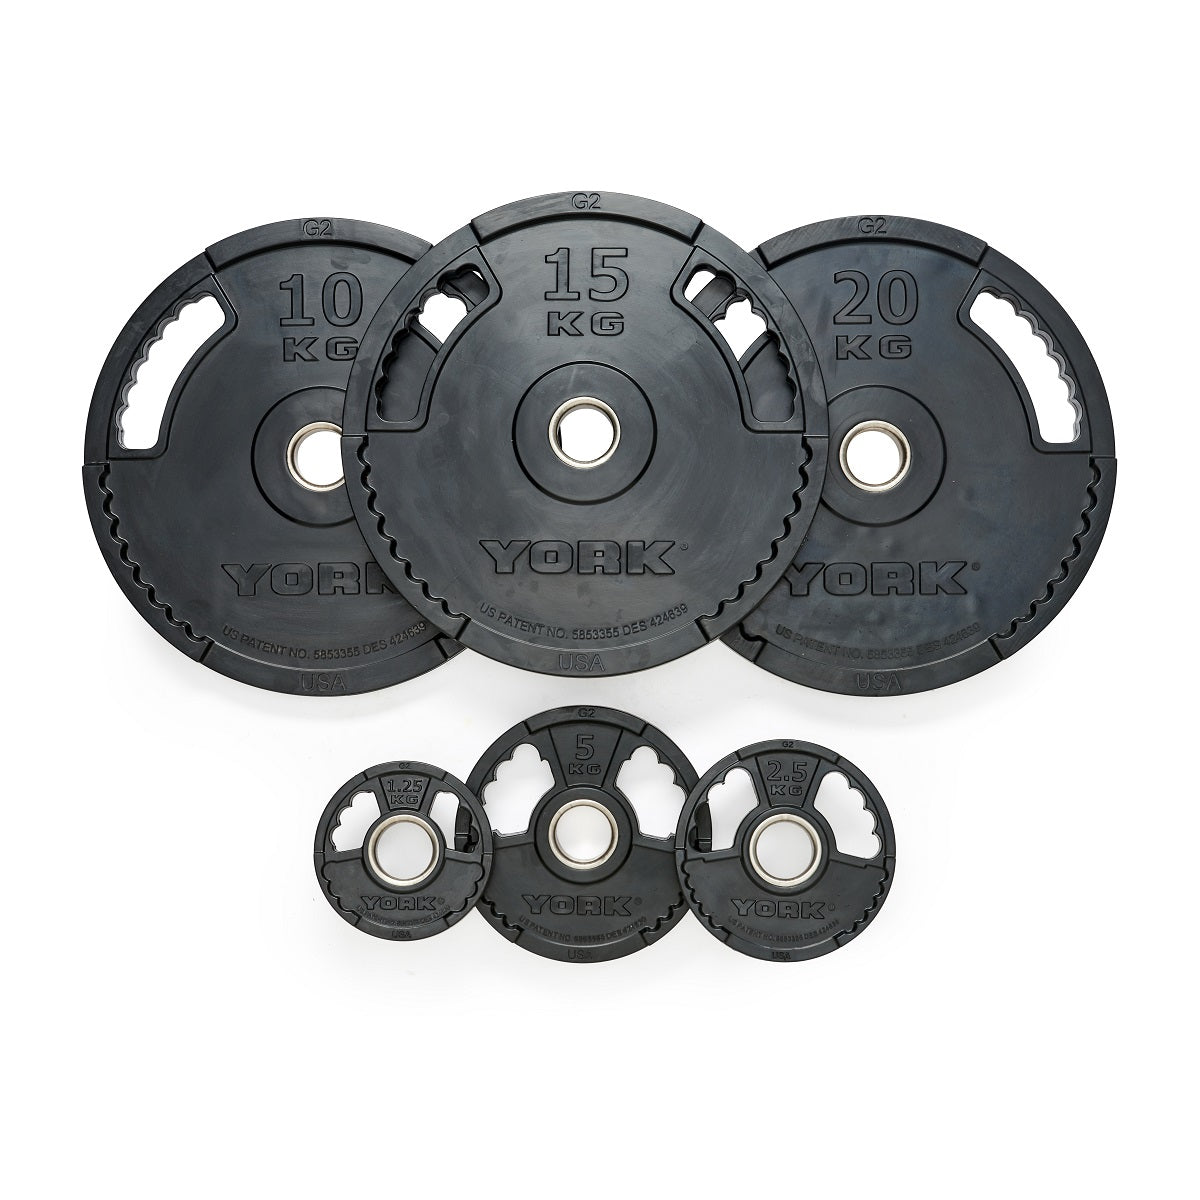 G2 Rubber Thin Line Olympic Weight Plates | Olympic Gym Equipment